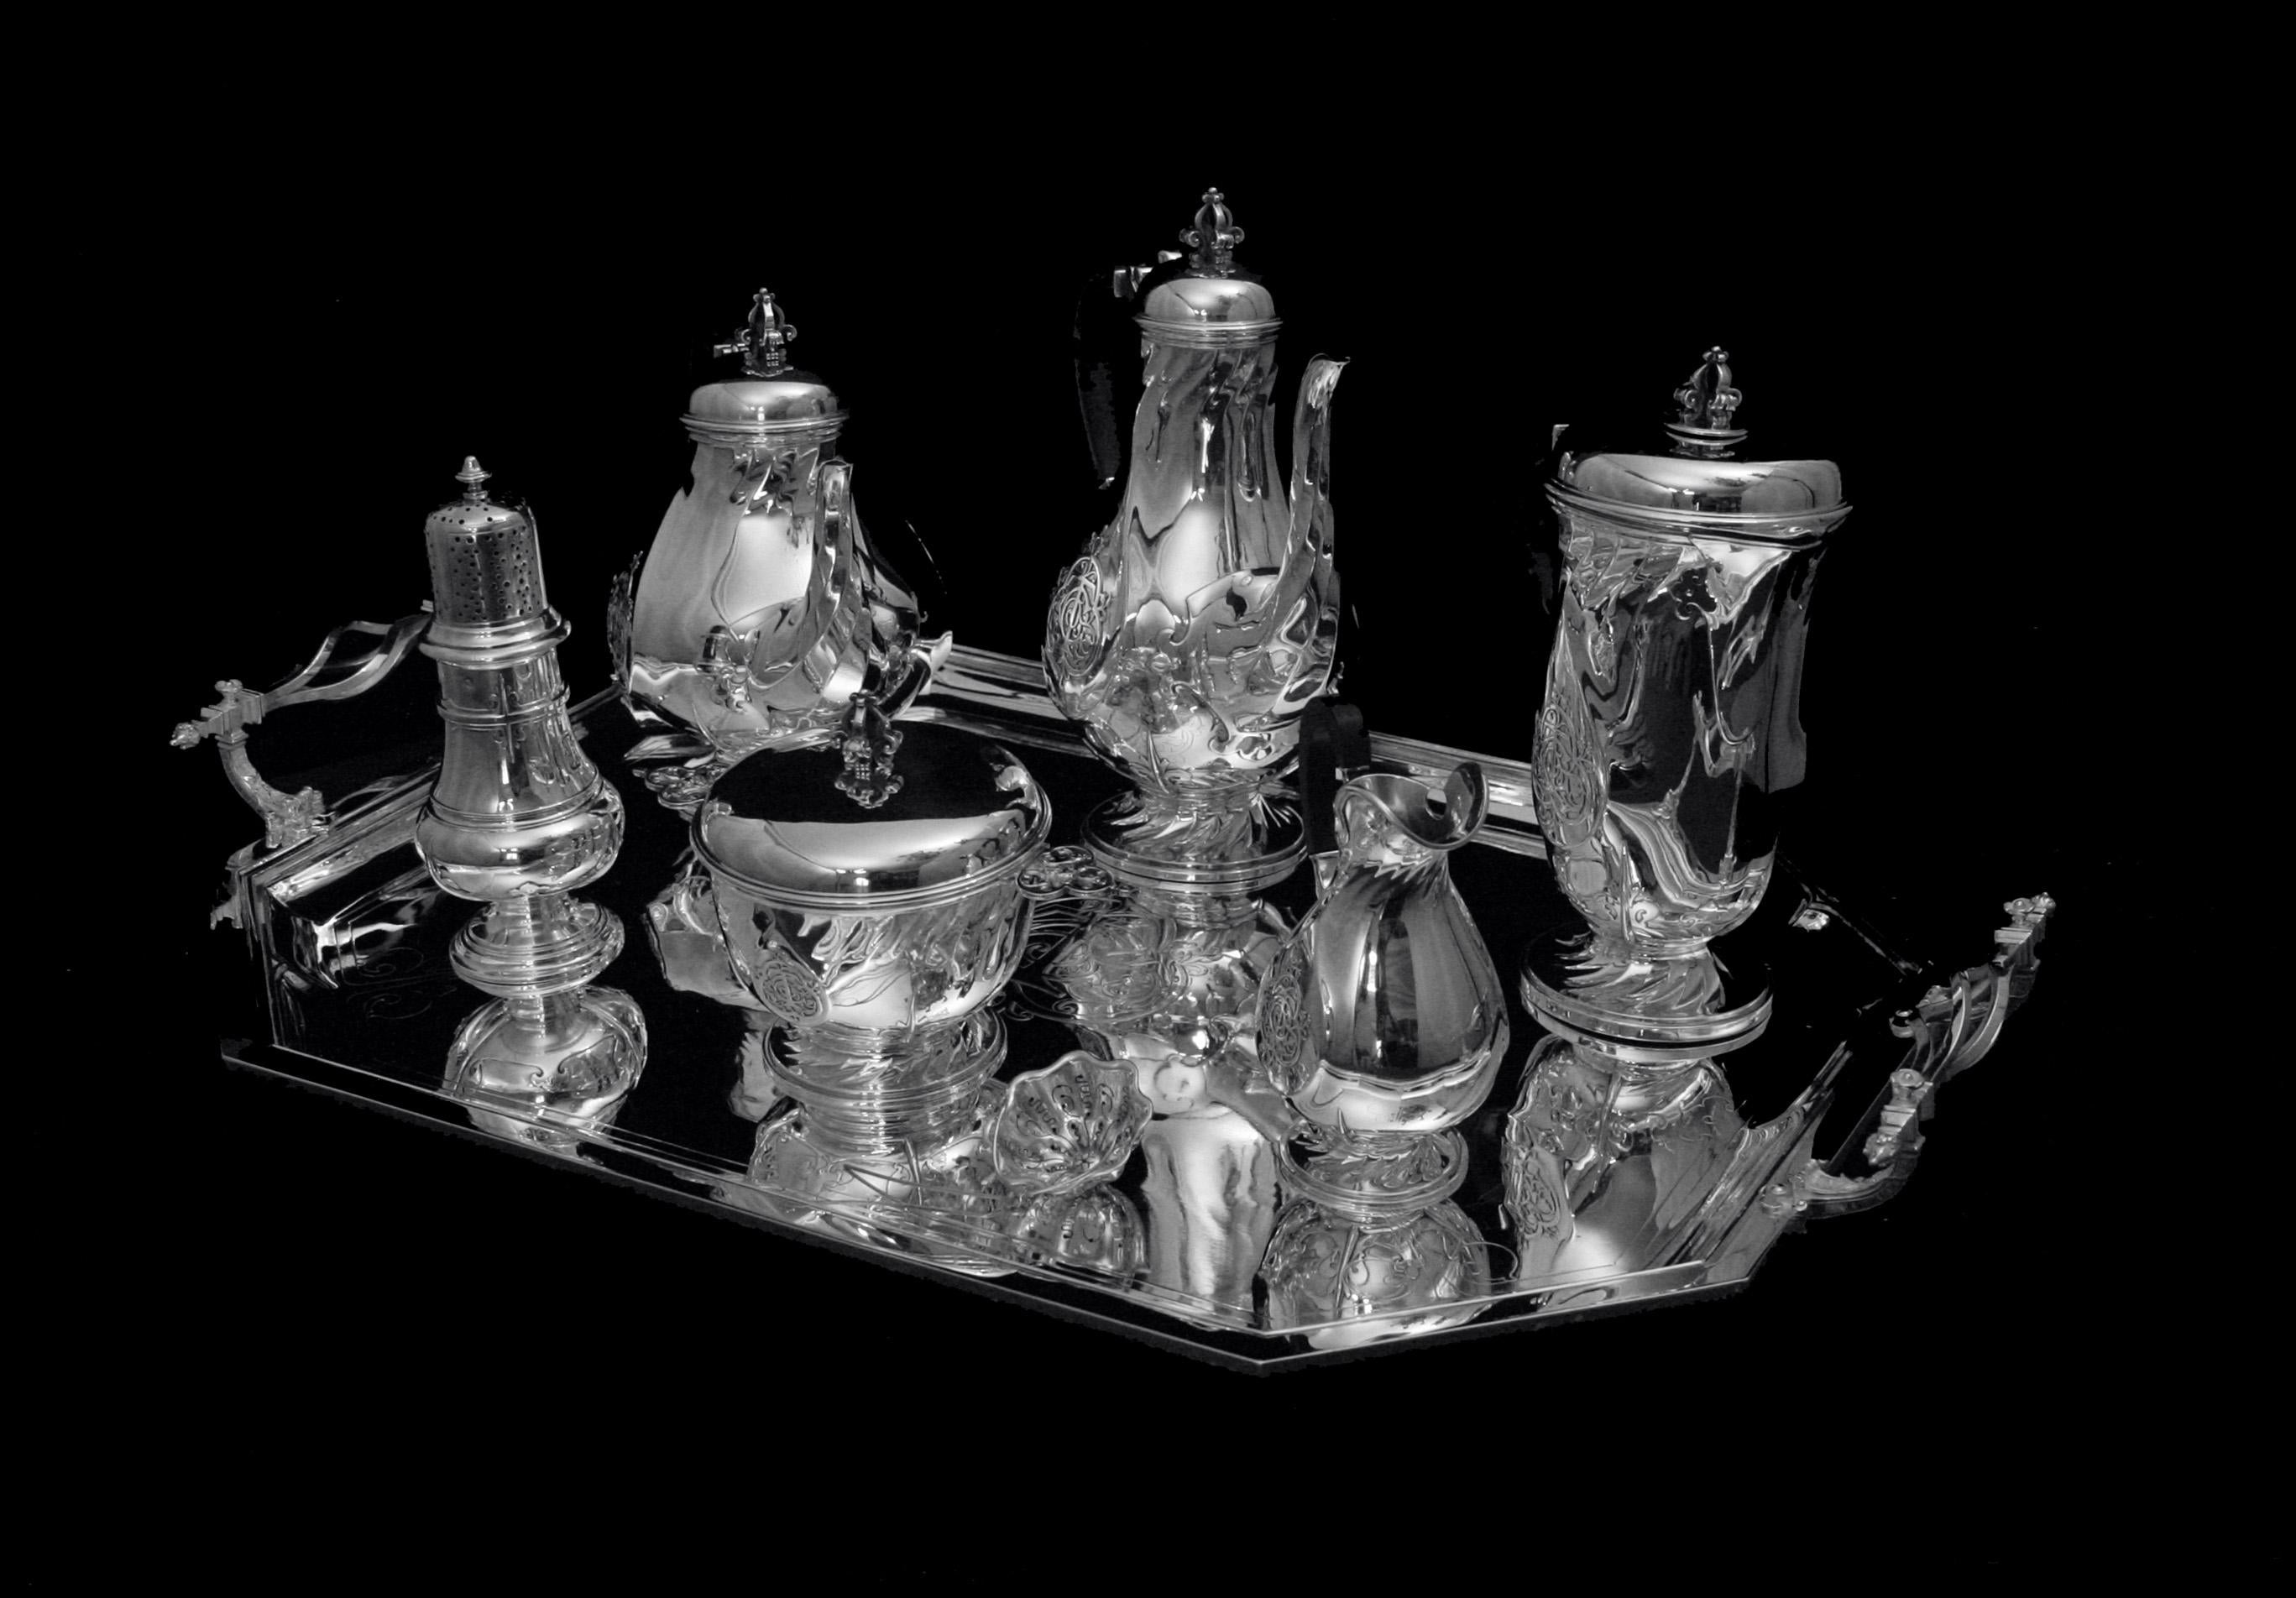 Direct from Paris, A Magnificent 10-piece Sterling Silver Tea Set by France's Premier Silversmith Cardeilhac (Christofle), 